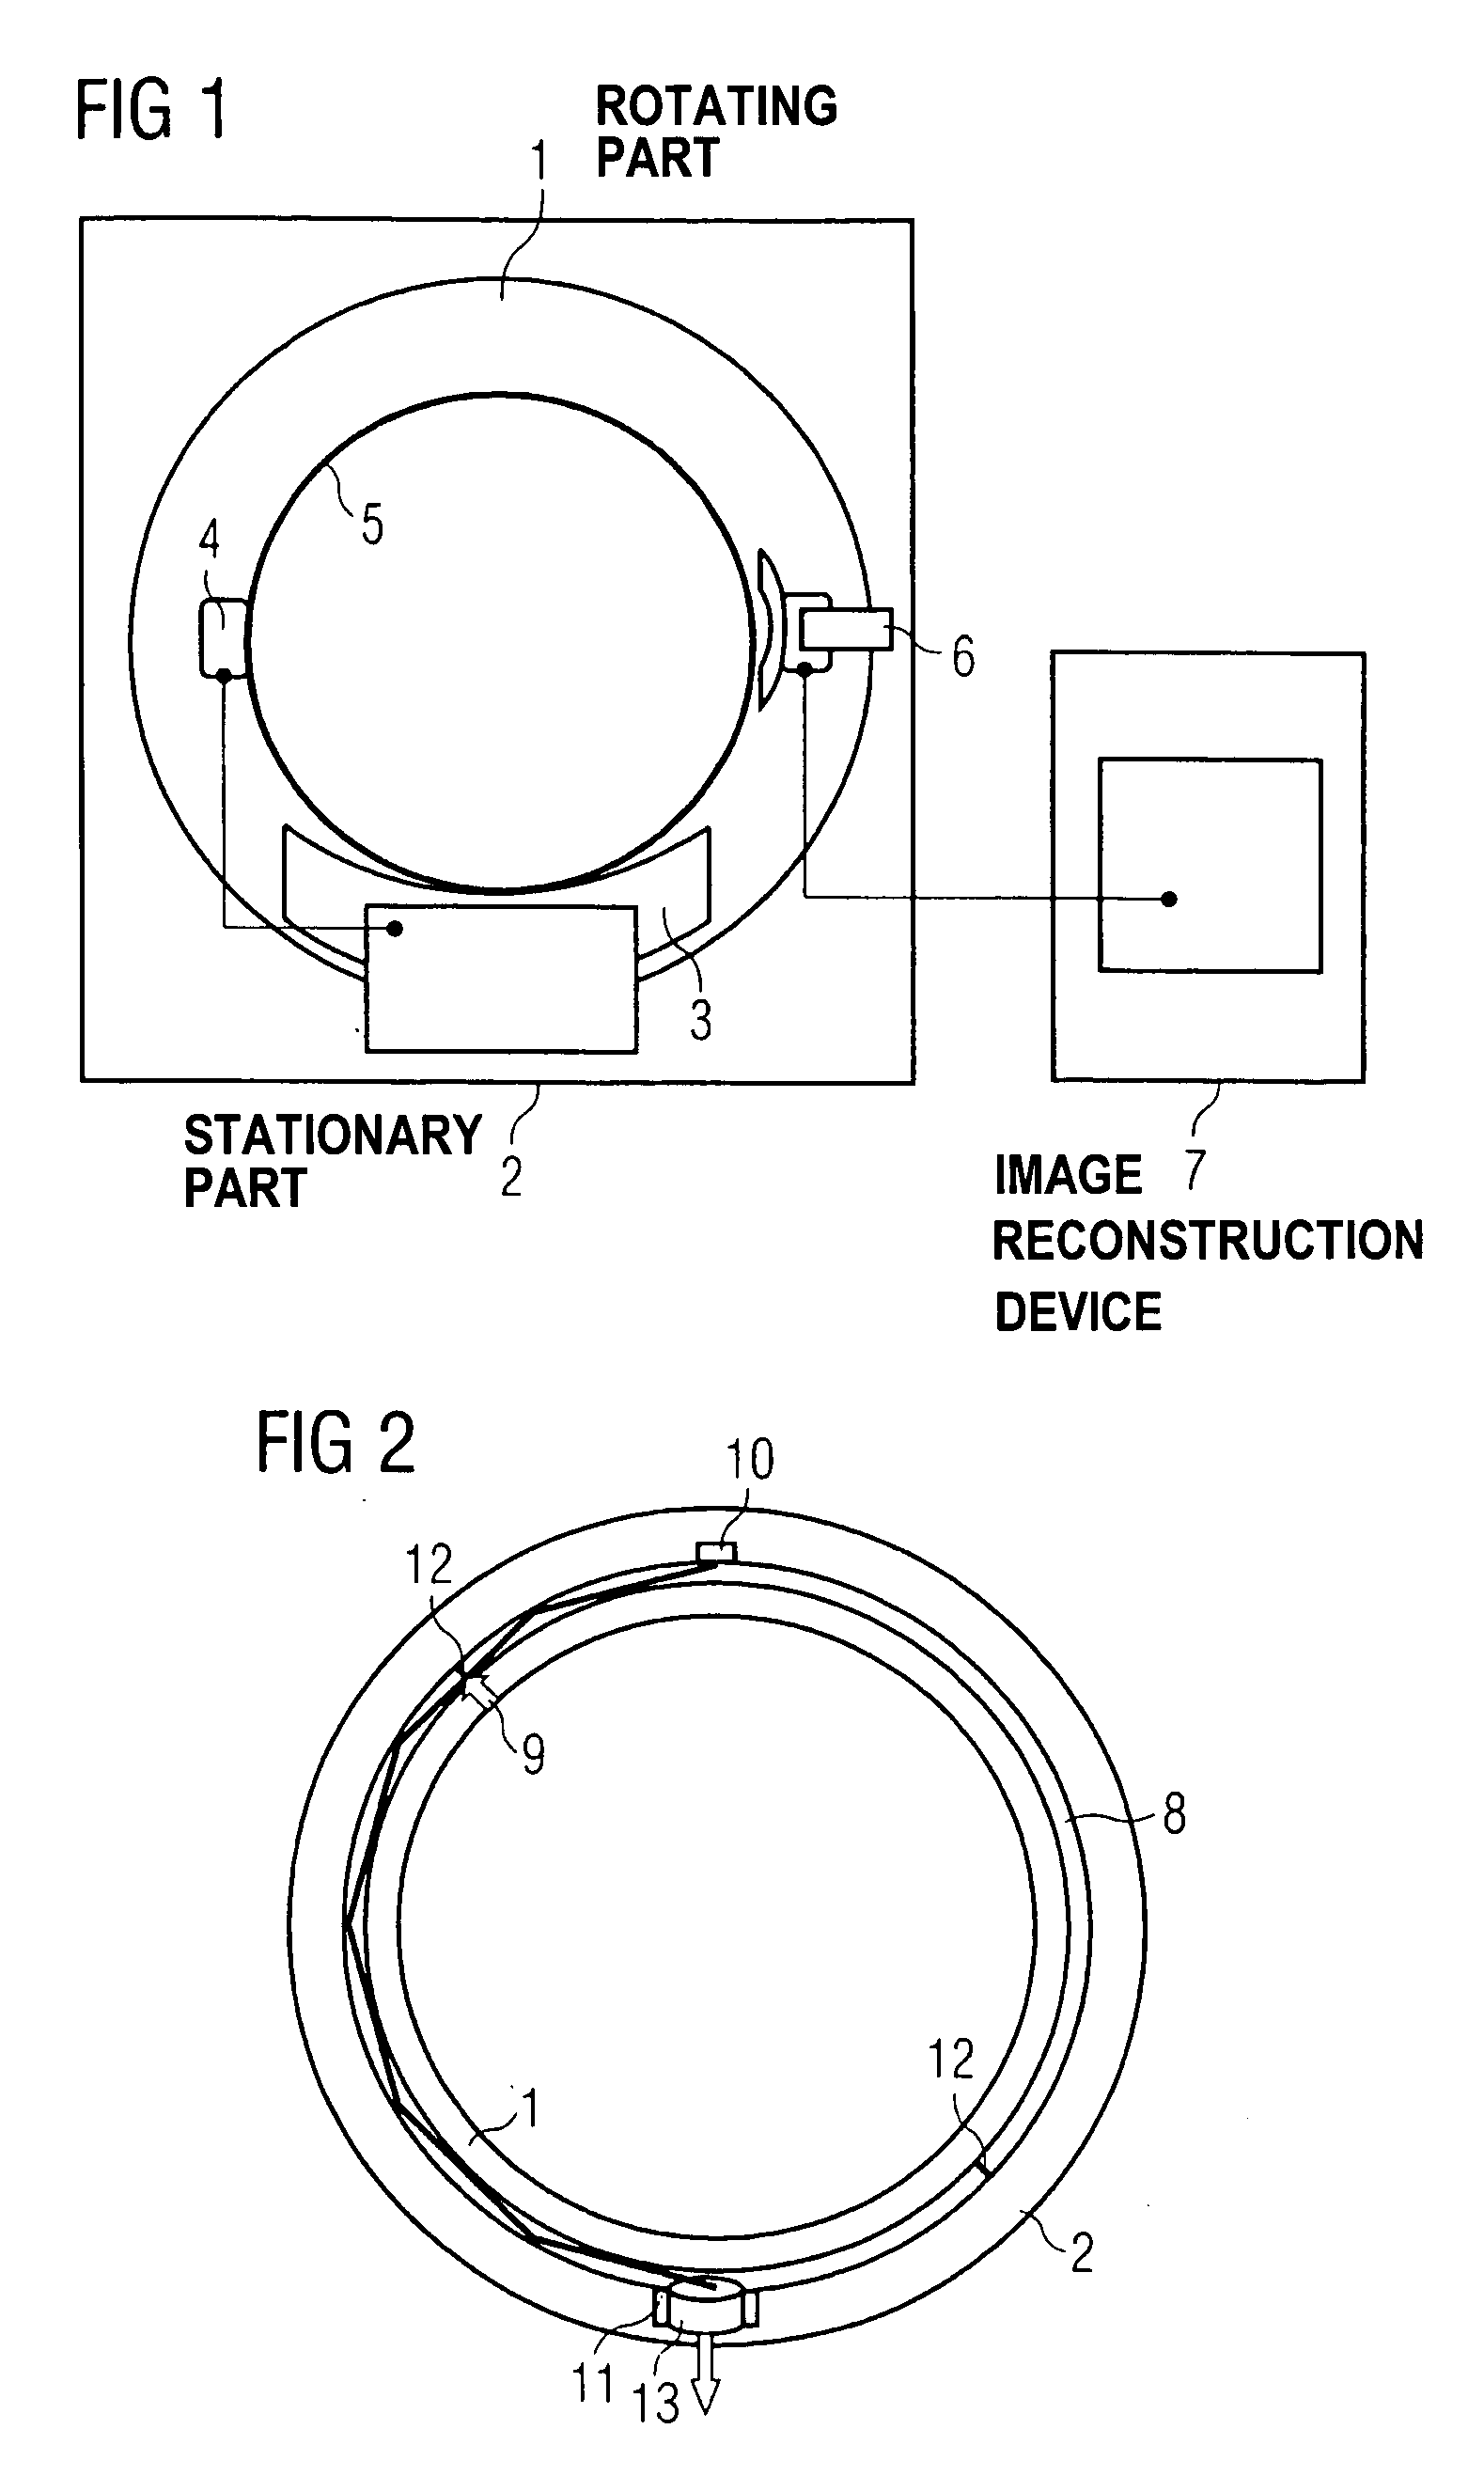 Apparatus to transfer optical signals between a rotating part and a stationary part of a machine